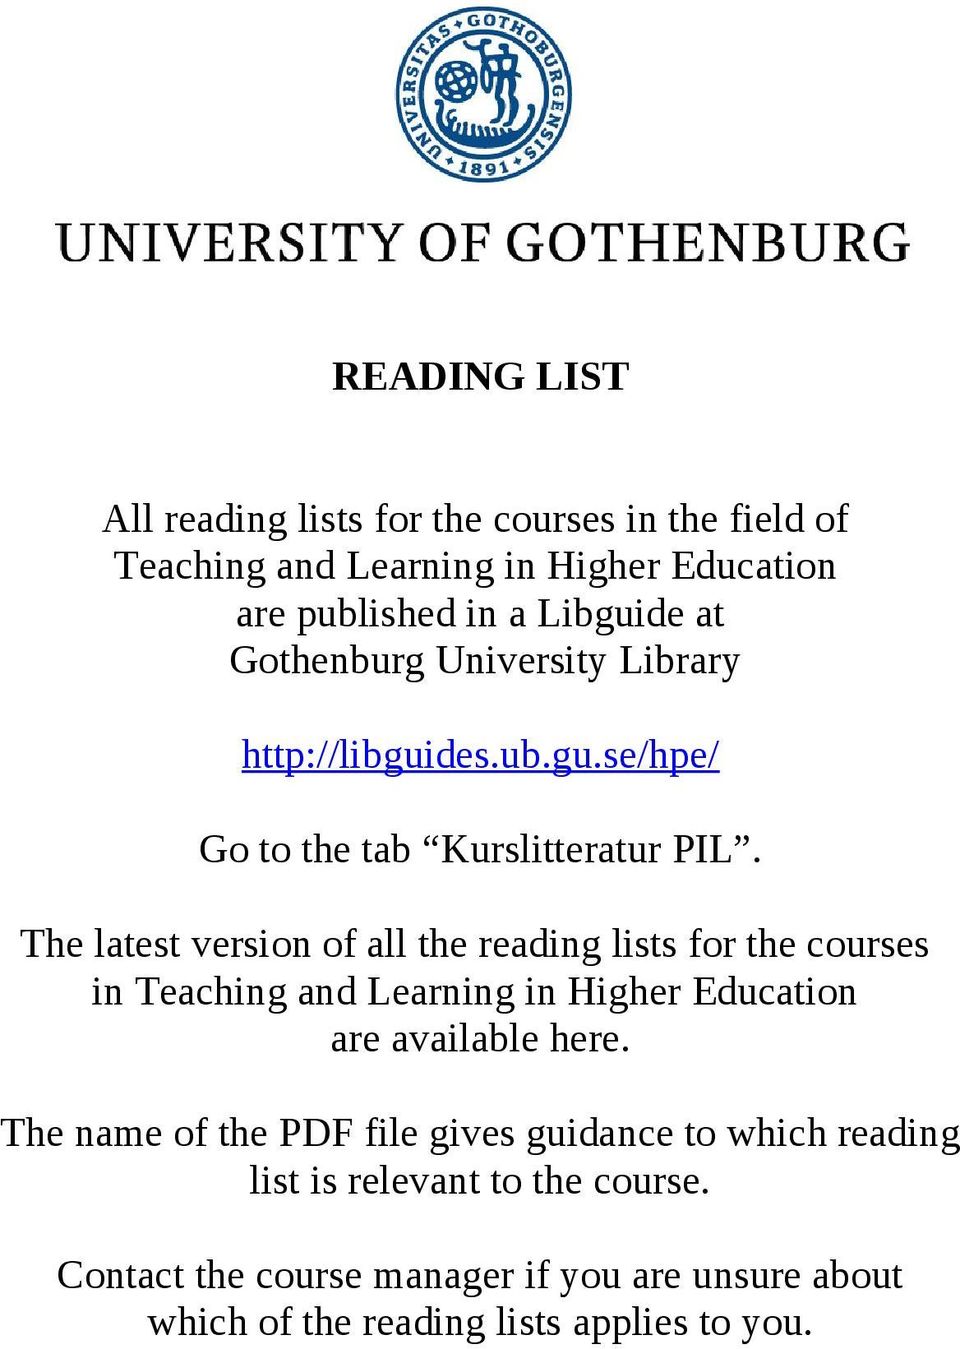 The latest version of all the reading lists for the courses in Teaching and Learning in Higher Education are available here.